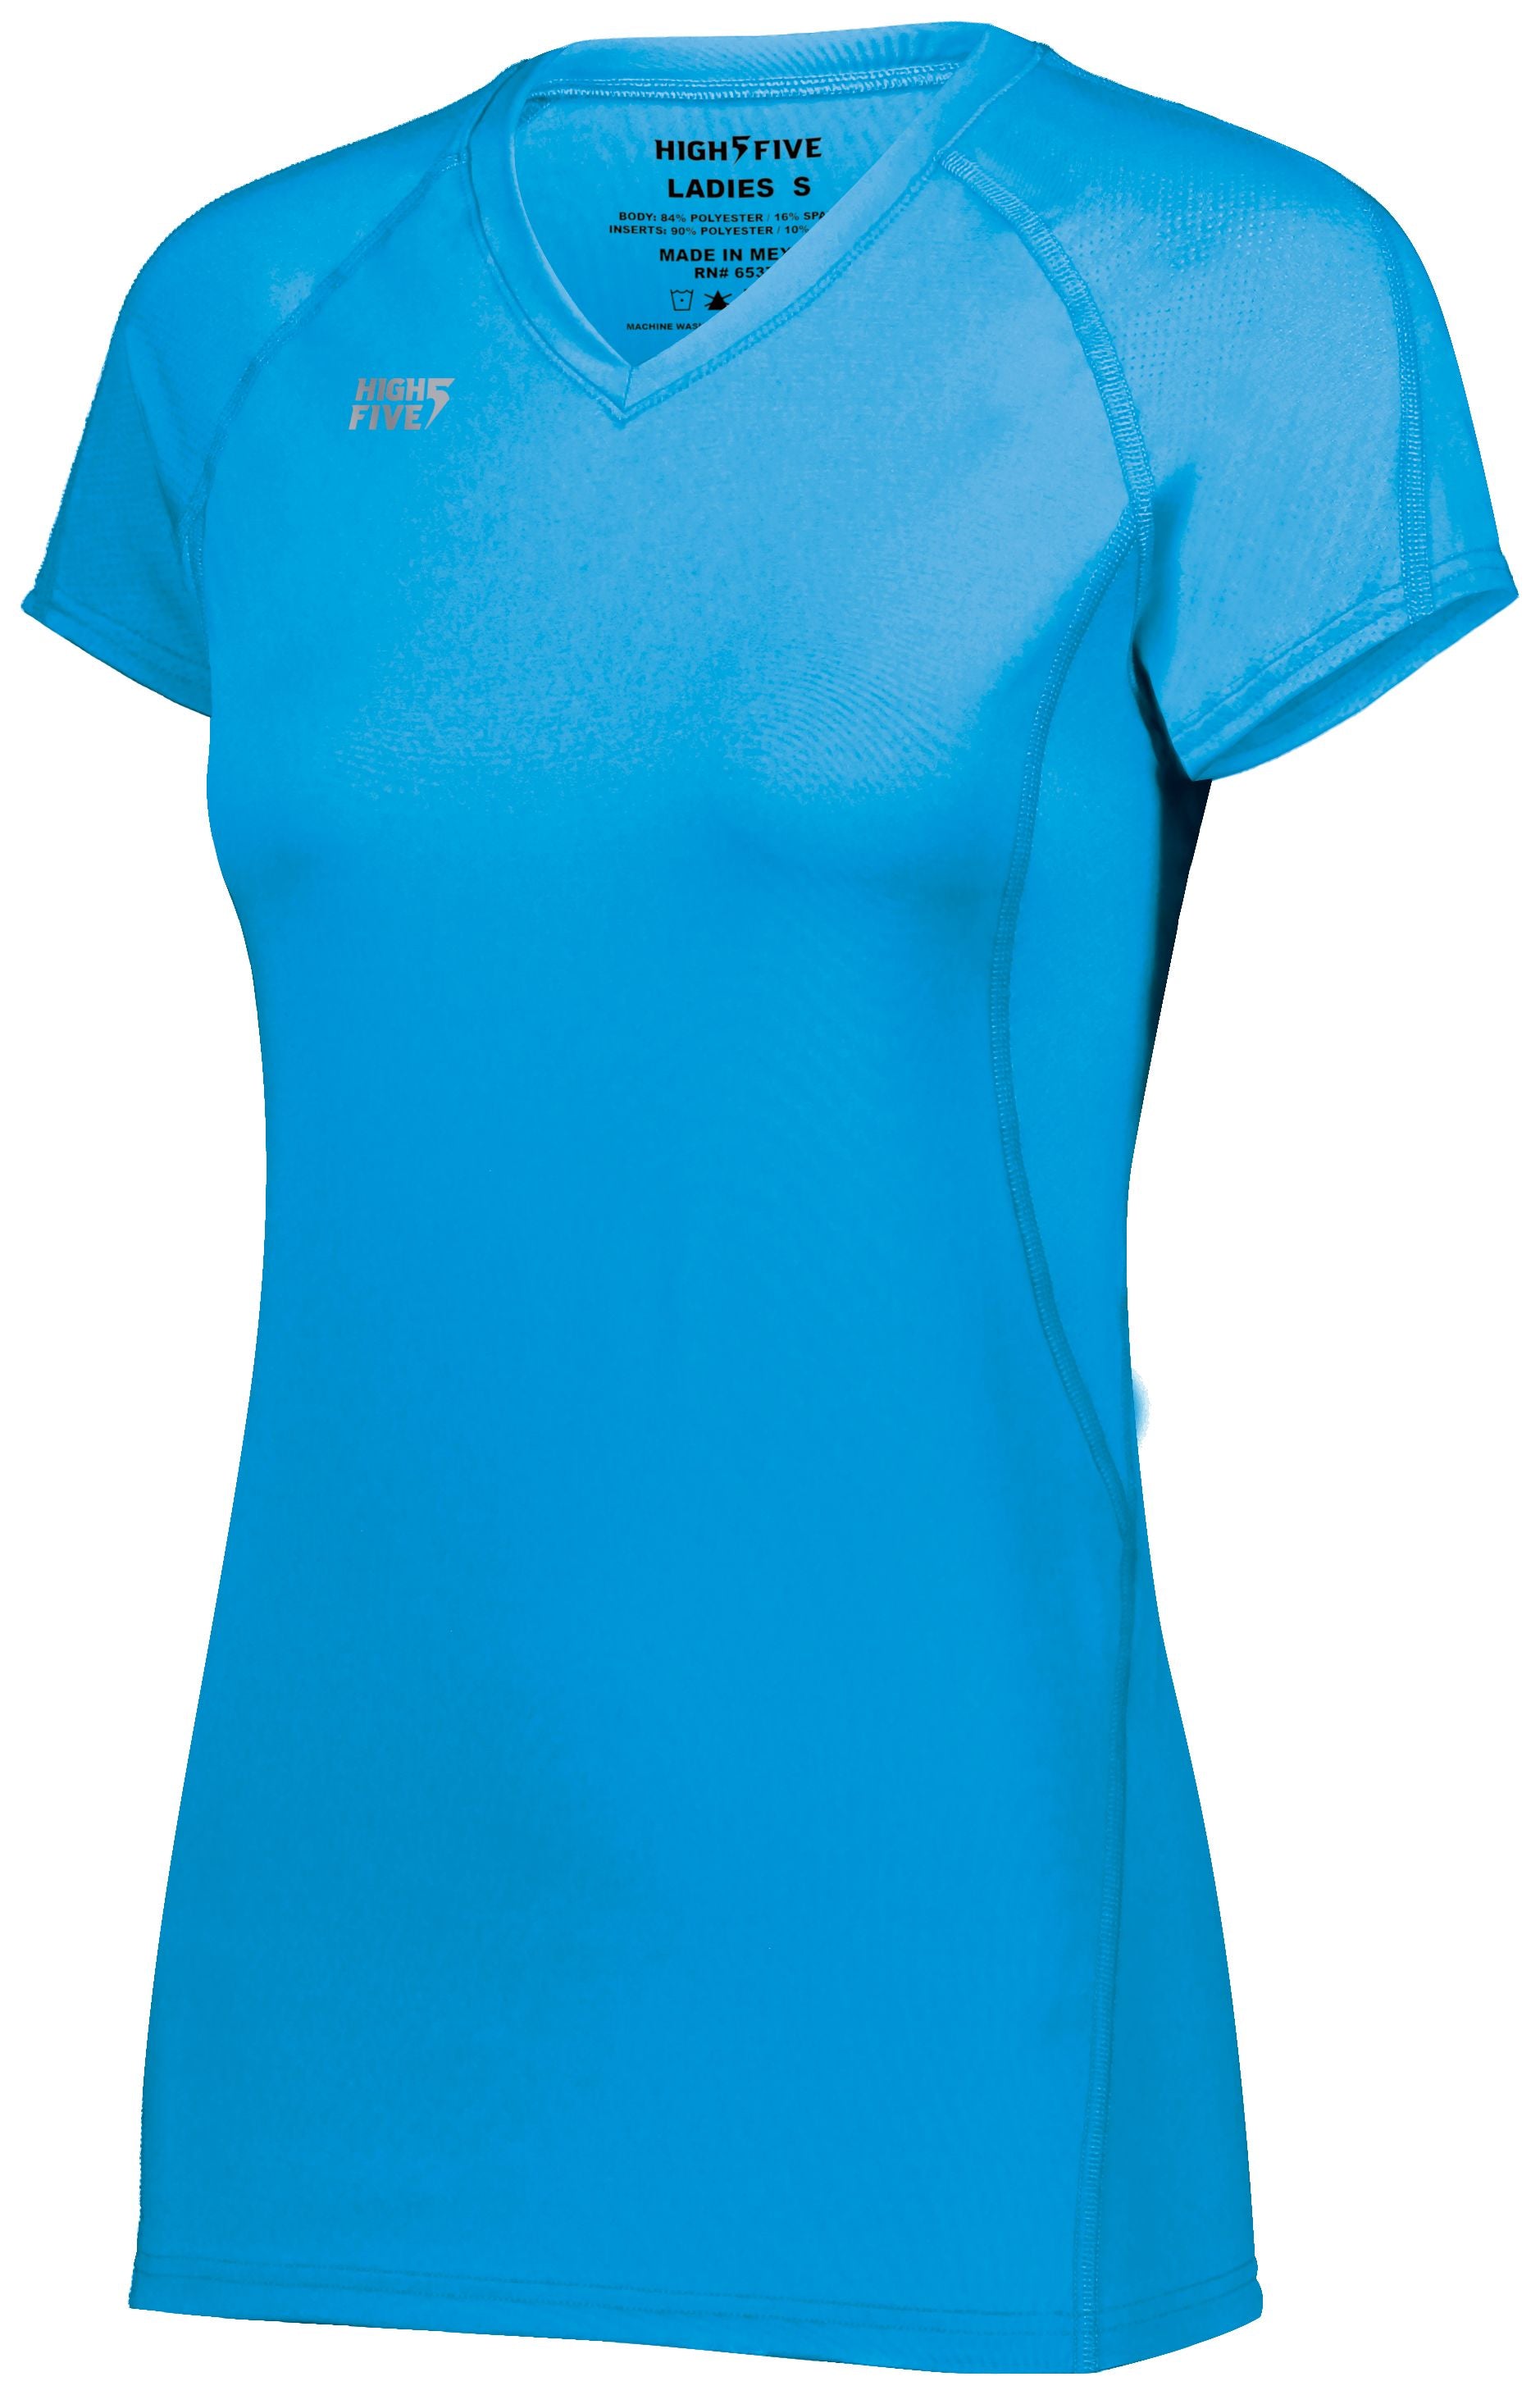 High 5 Ladies Truhit Short Sleeve Jersey in Power Blue  -Part of the Ladies, Ladies-Jersey, High5-Products, Volleyball, Shirts product lines at KanaleyCreations.com